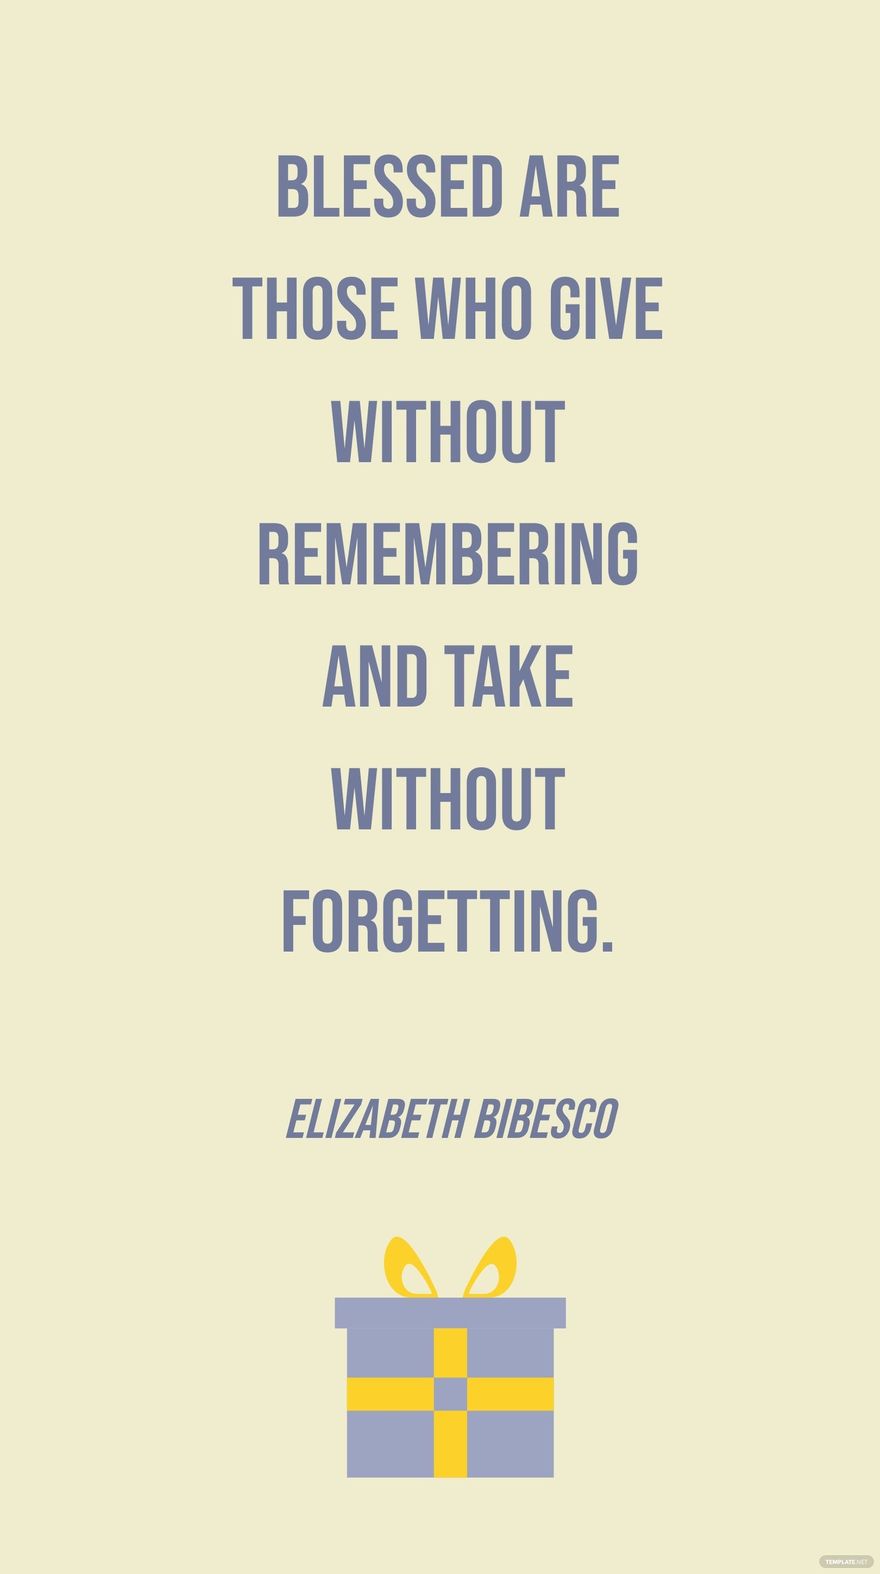 Elizabeth Bibesco - Blessed are those who give without remembering and take without forgetting.